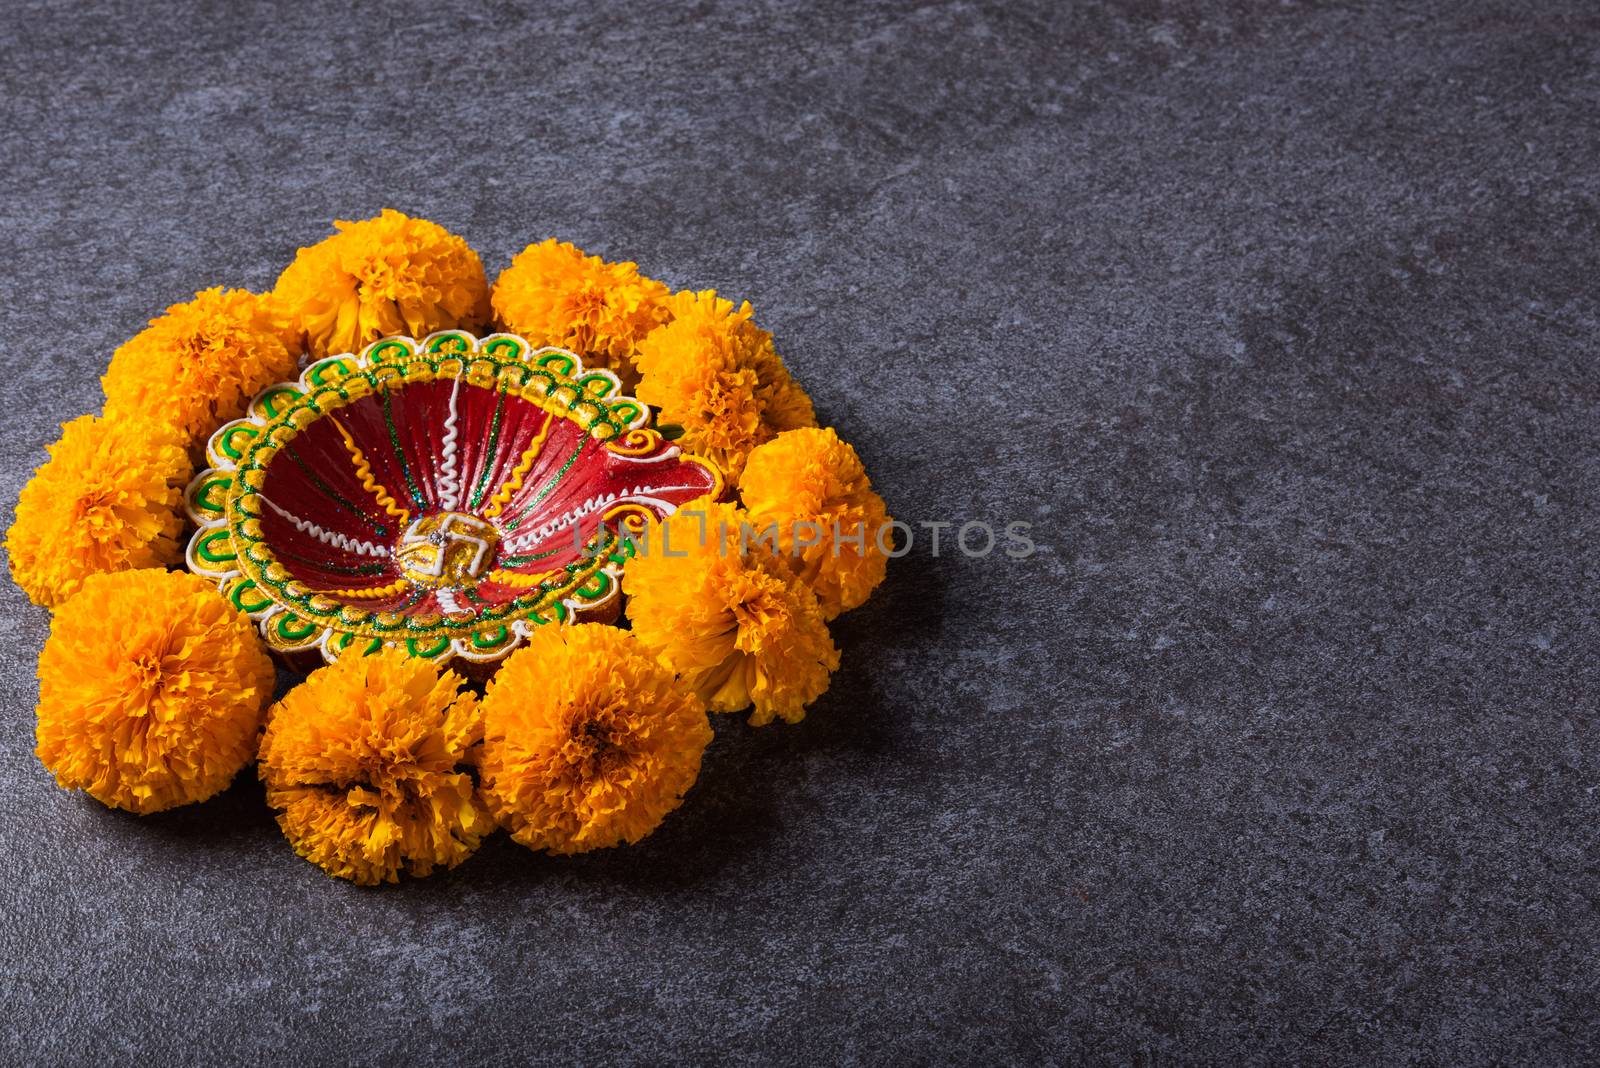 clay lit Diya or oil lamp and yellow flower by Sorapop